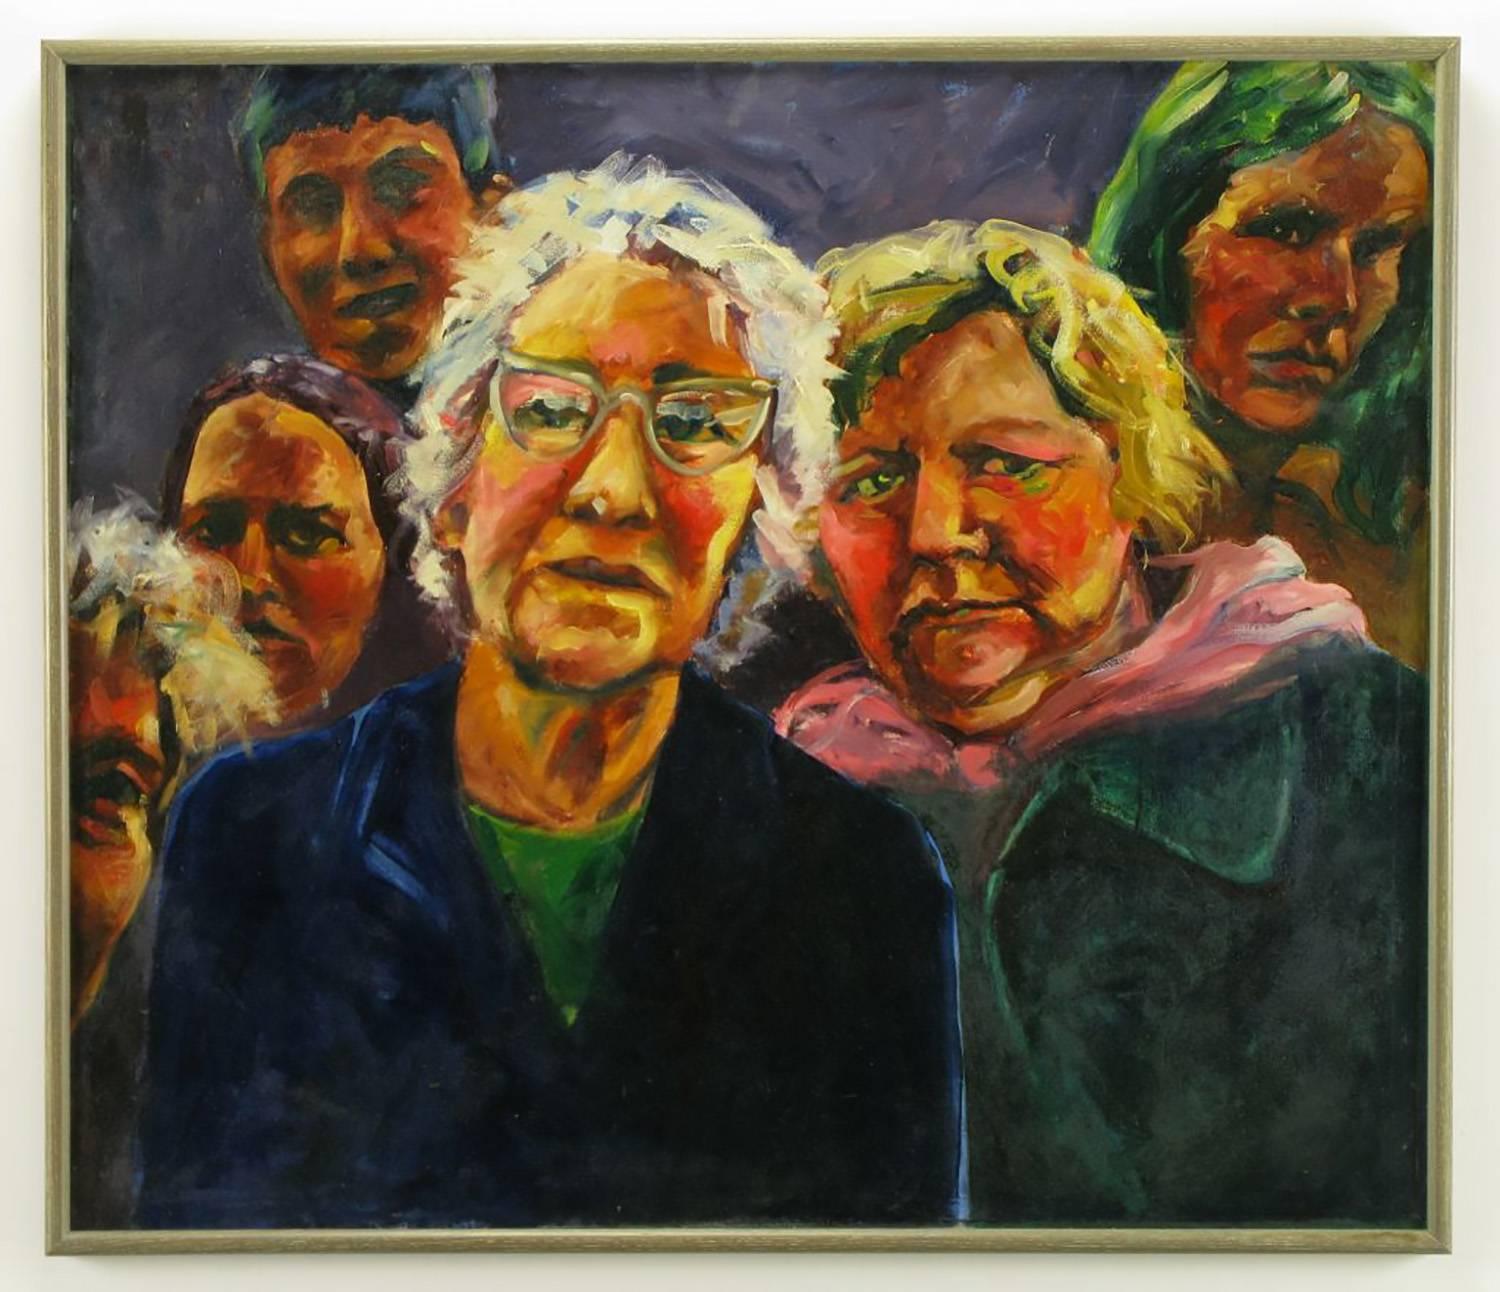 Large and colorful Expressionist painting of two curious women in the foreground, with four other people in the background. Oil on canvas with silver leafed wood frame. Unsigned, but authenticated by Chicago artist Nancy King Mertz as one of her